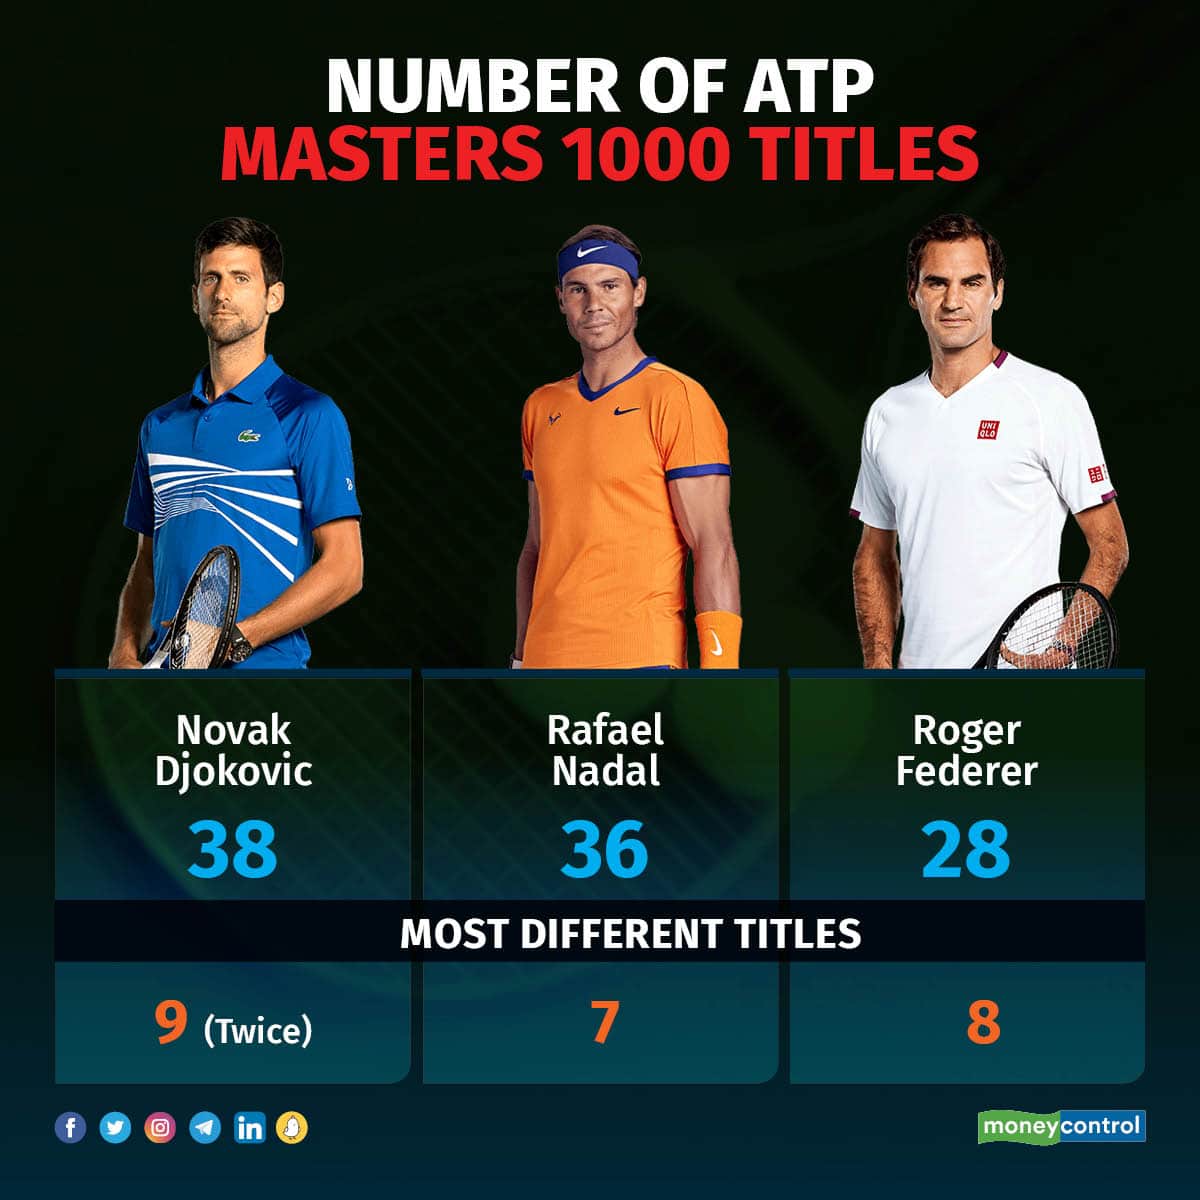 The ATP Masters 1000 tennis tournaments are elite tournaments where top players compete. The winner earns 1,000 points in the ranking race. Hence, the name of the series.